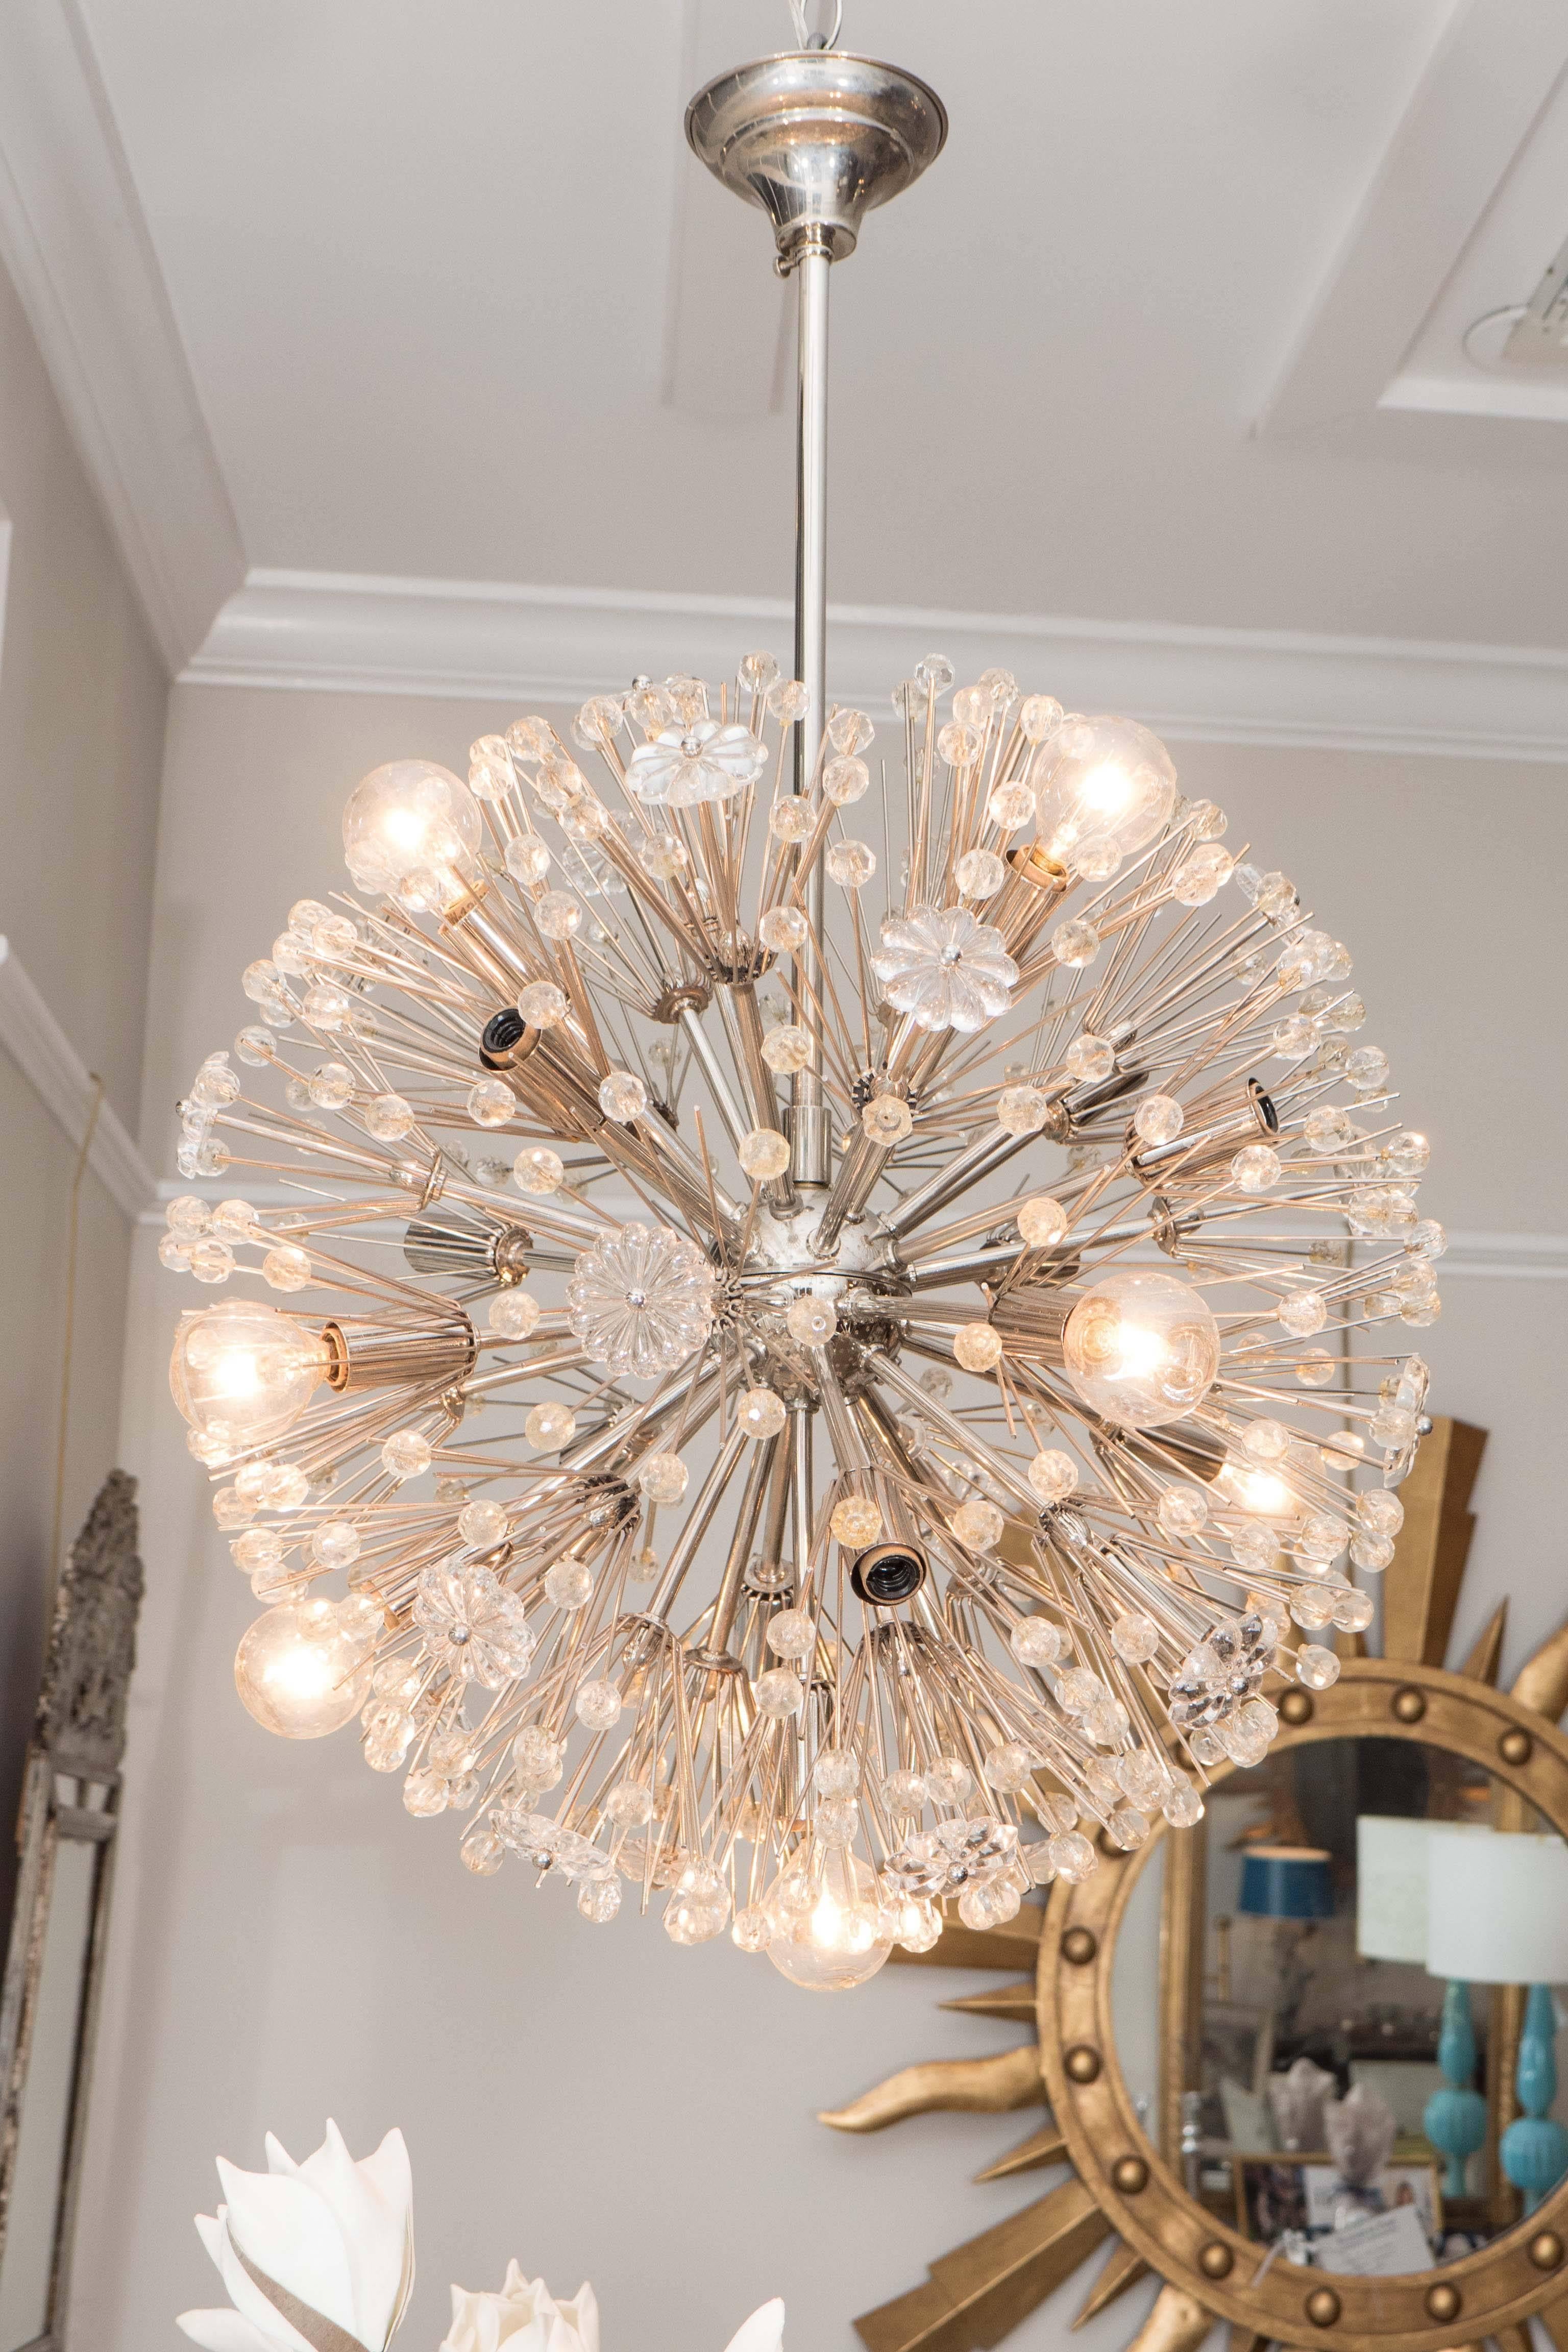 This beauty will light up the room! The sputnik ceiling fixture has twelve lights and is accented with round glass faceted beads and glass flowers, adding a touch of glamour and whimsy. The chandelier has a nickel-plated finish and has been re-wired